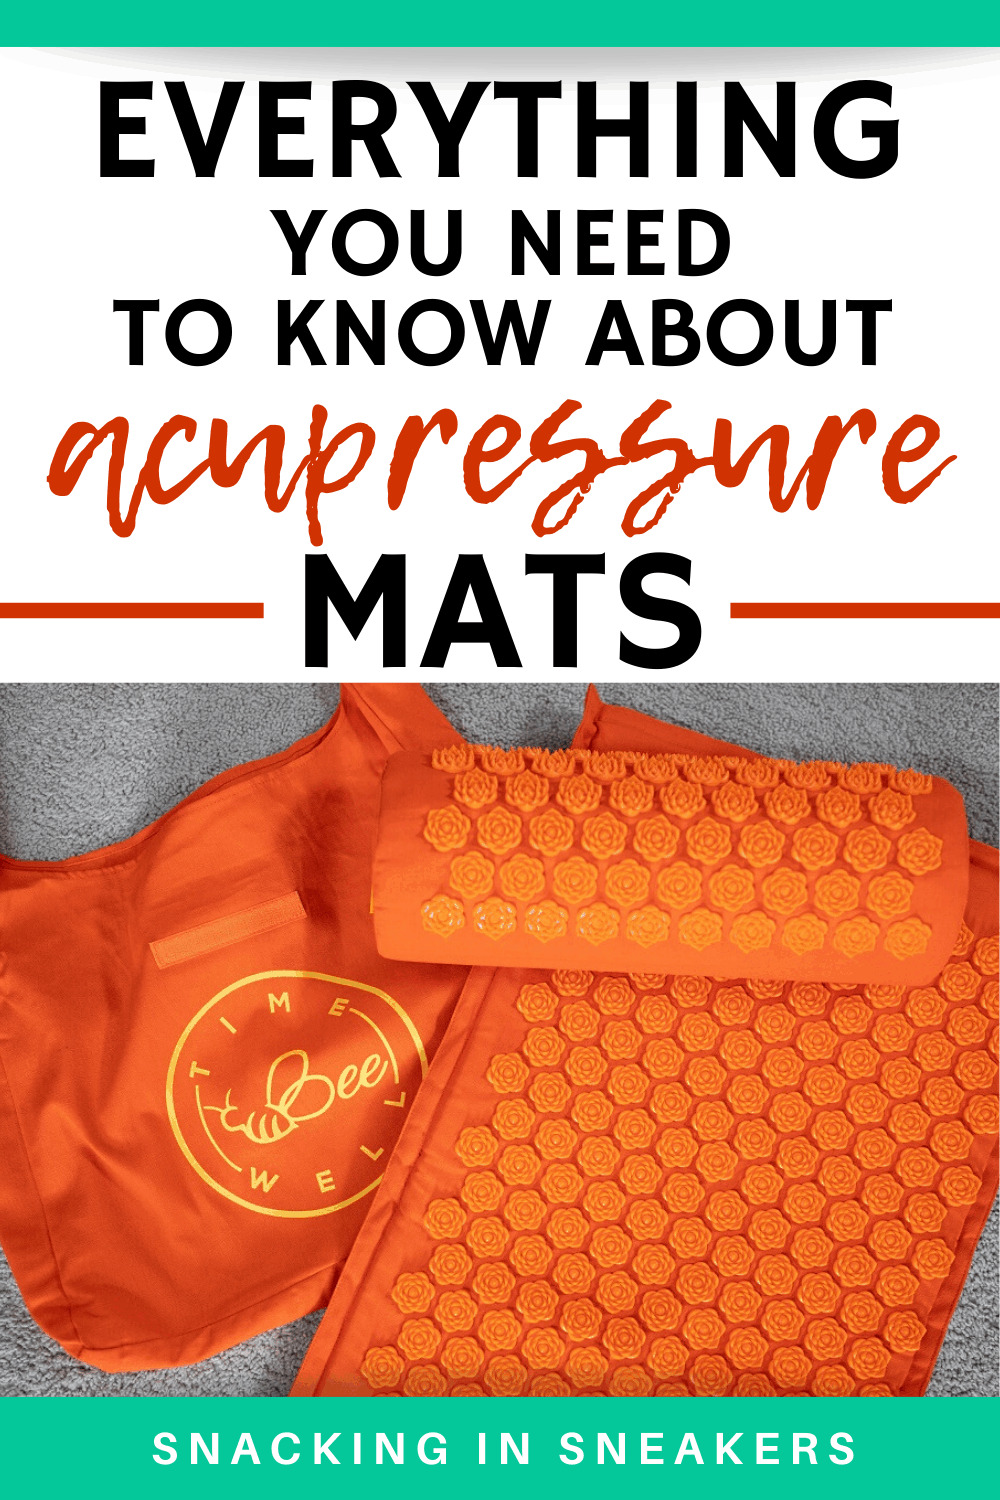 How to Use an Acupressure Mat + Possible Benefits